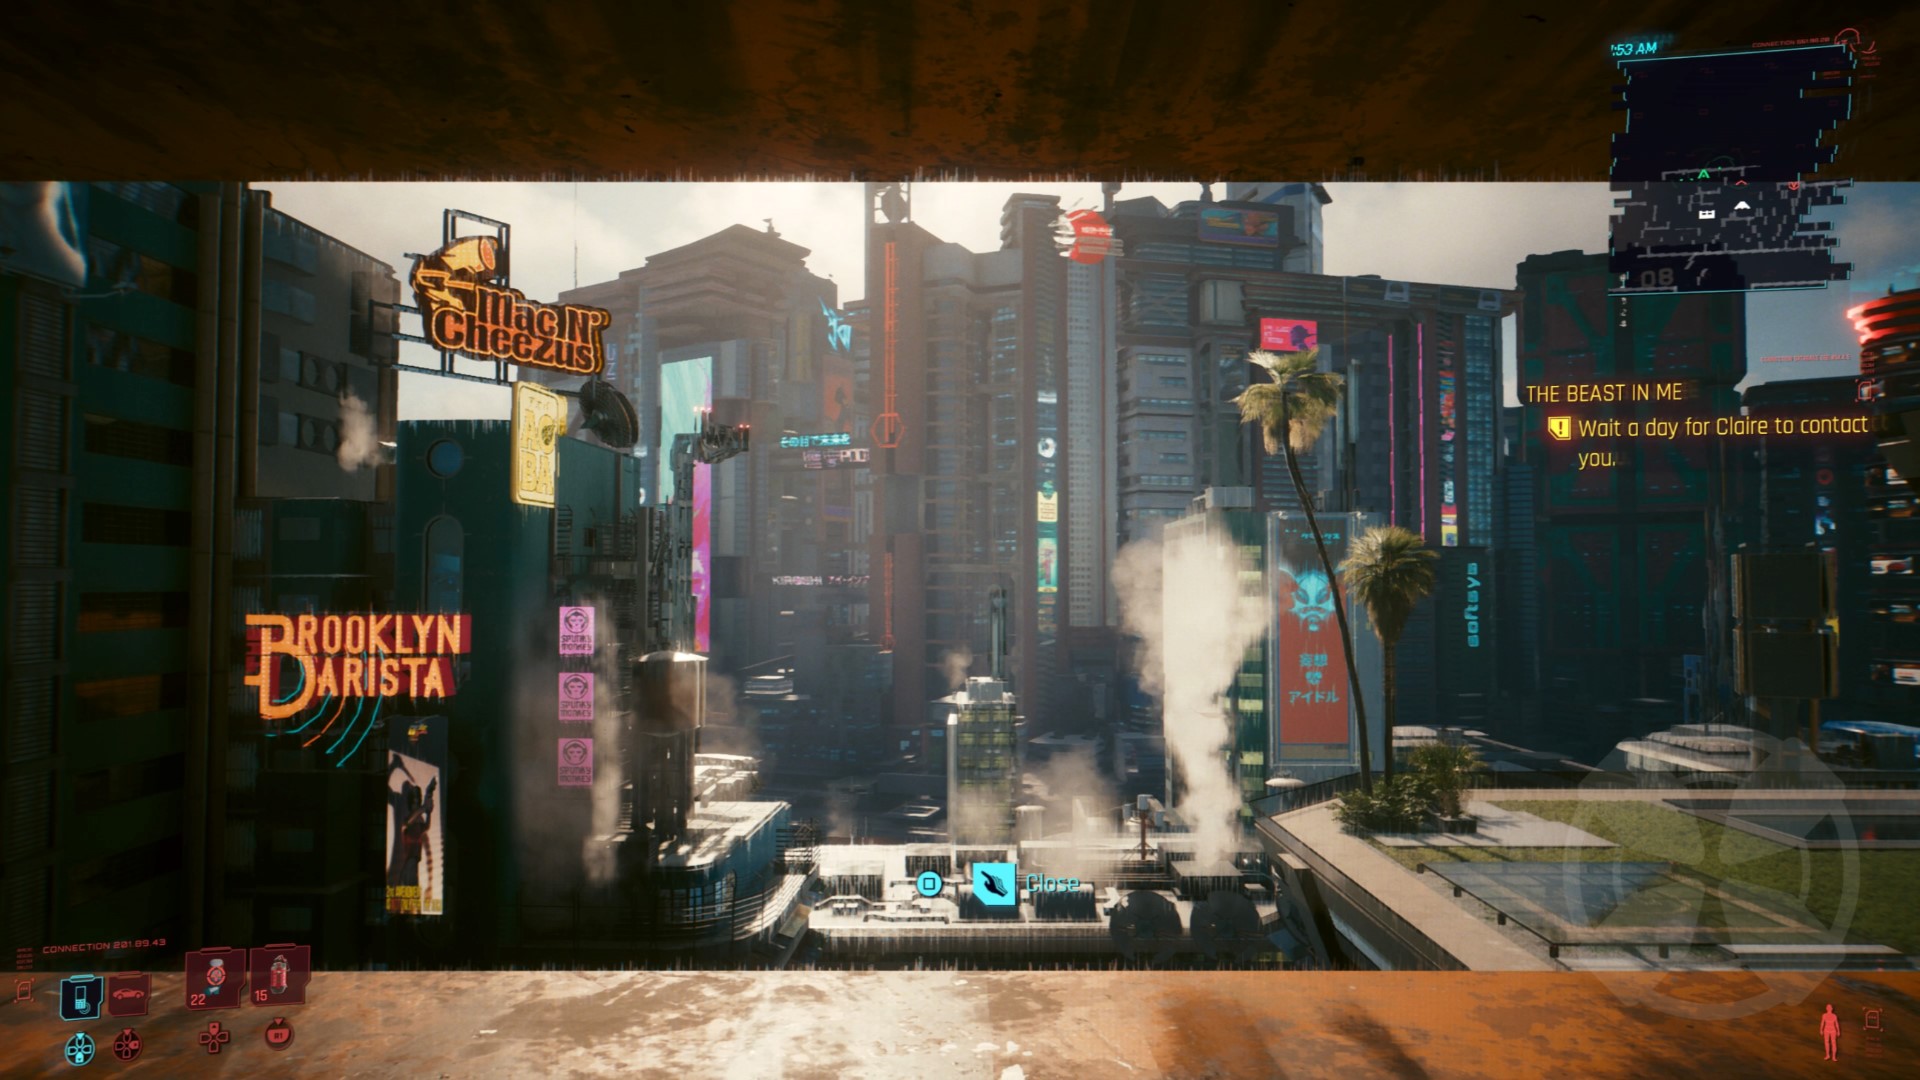 An image showing a view of Night City from V's apartment in Cyberpunk 2077.